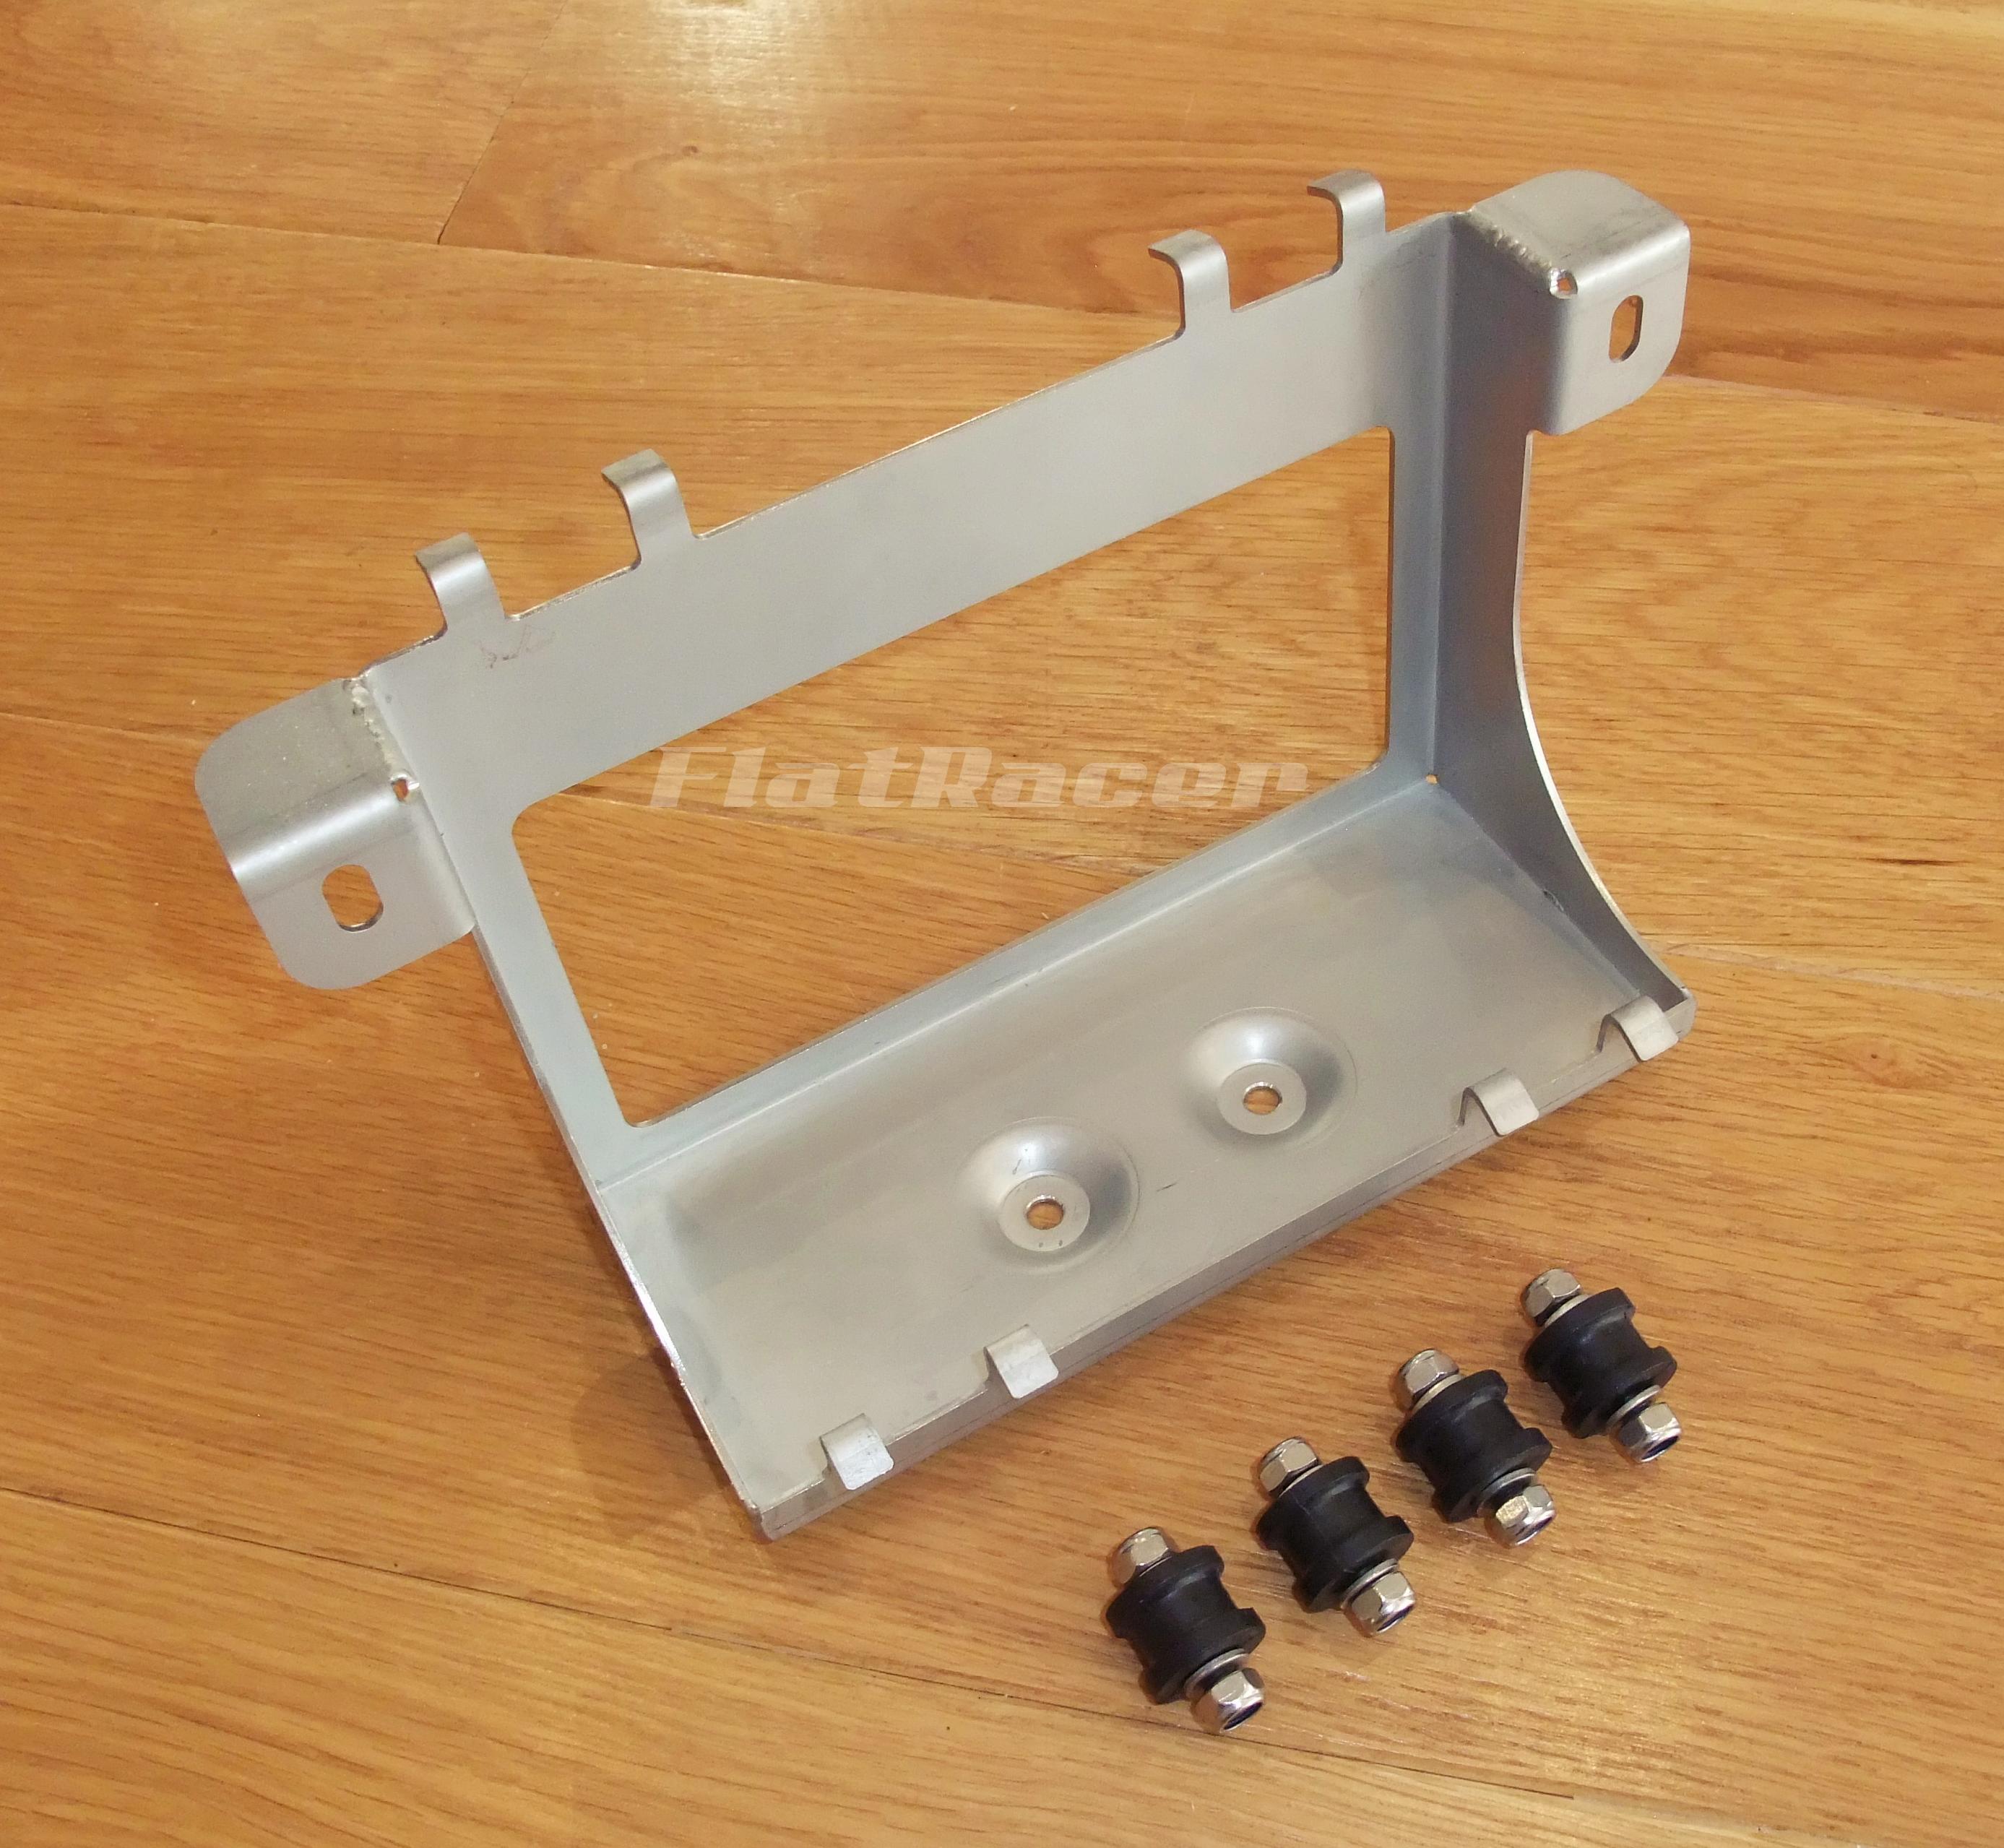 FlatRacer BMW Monolever (post 1985) stainless steel battery tray - with 4 x M6 rubber mounting rubber bobbins